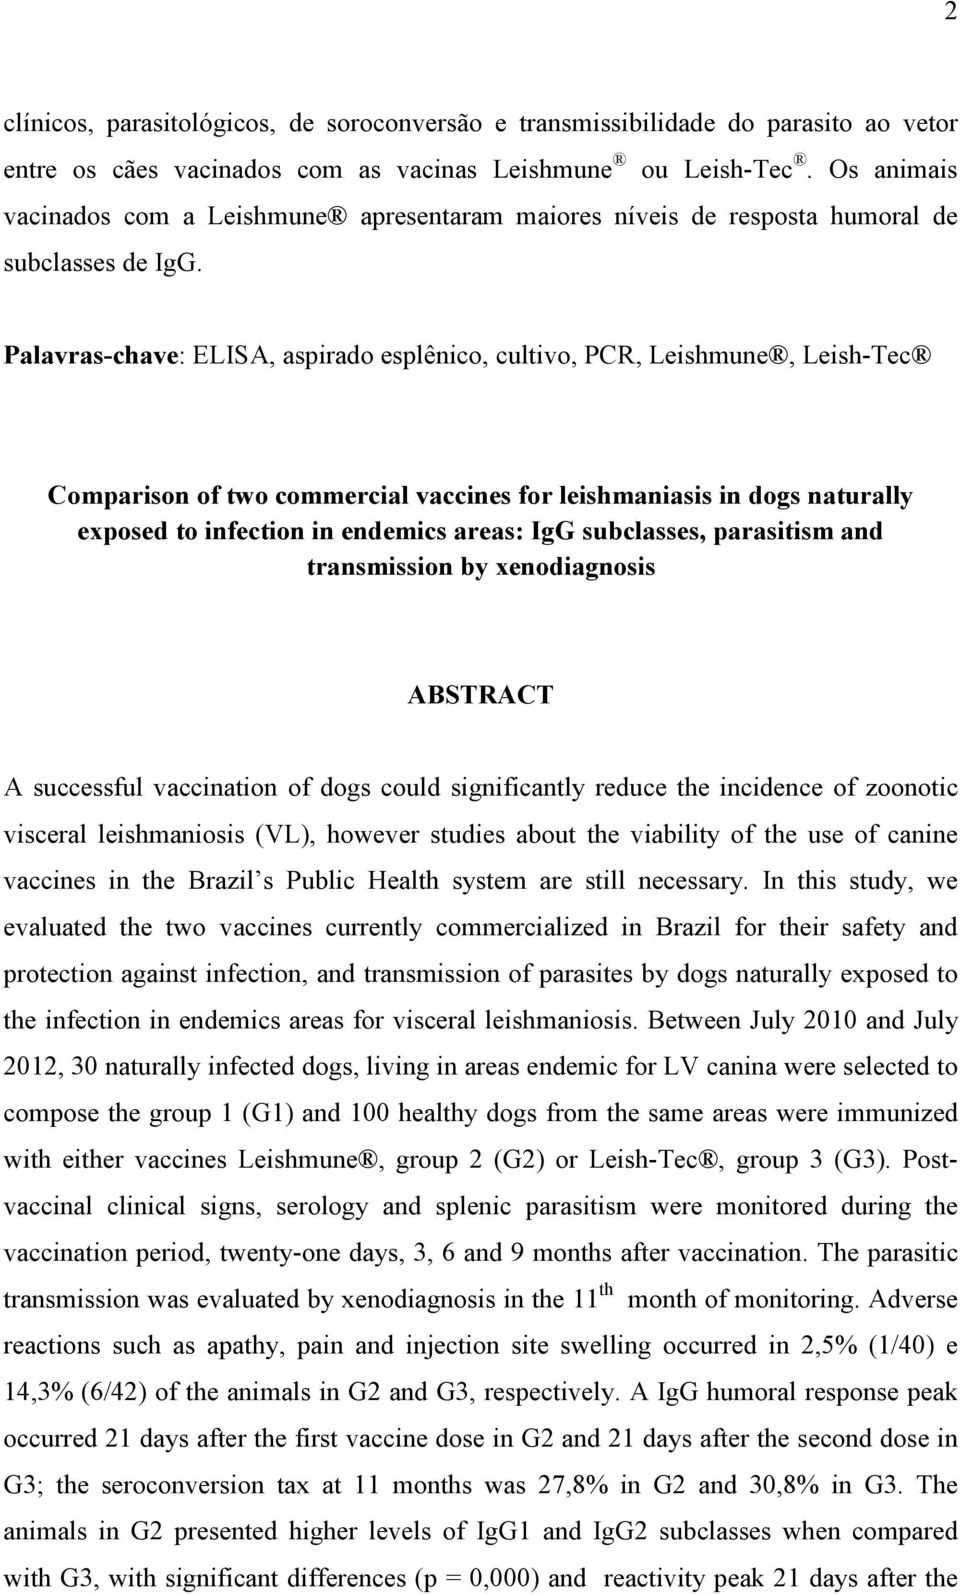 Palavras-chave: ELISA, aspirado esplênico, cultivo, PCR, Leishmune, Leish-Tec Comparison of two commercial vaccines for leishmaniasis in dogs naturally exposed to infection in endemics areas: IgG